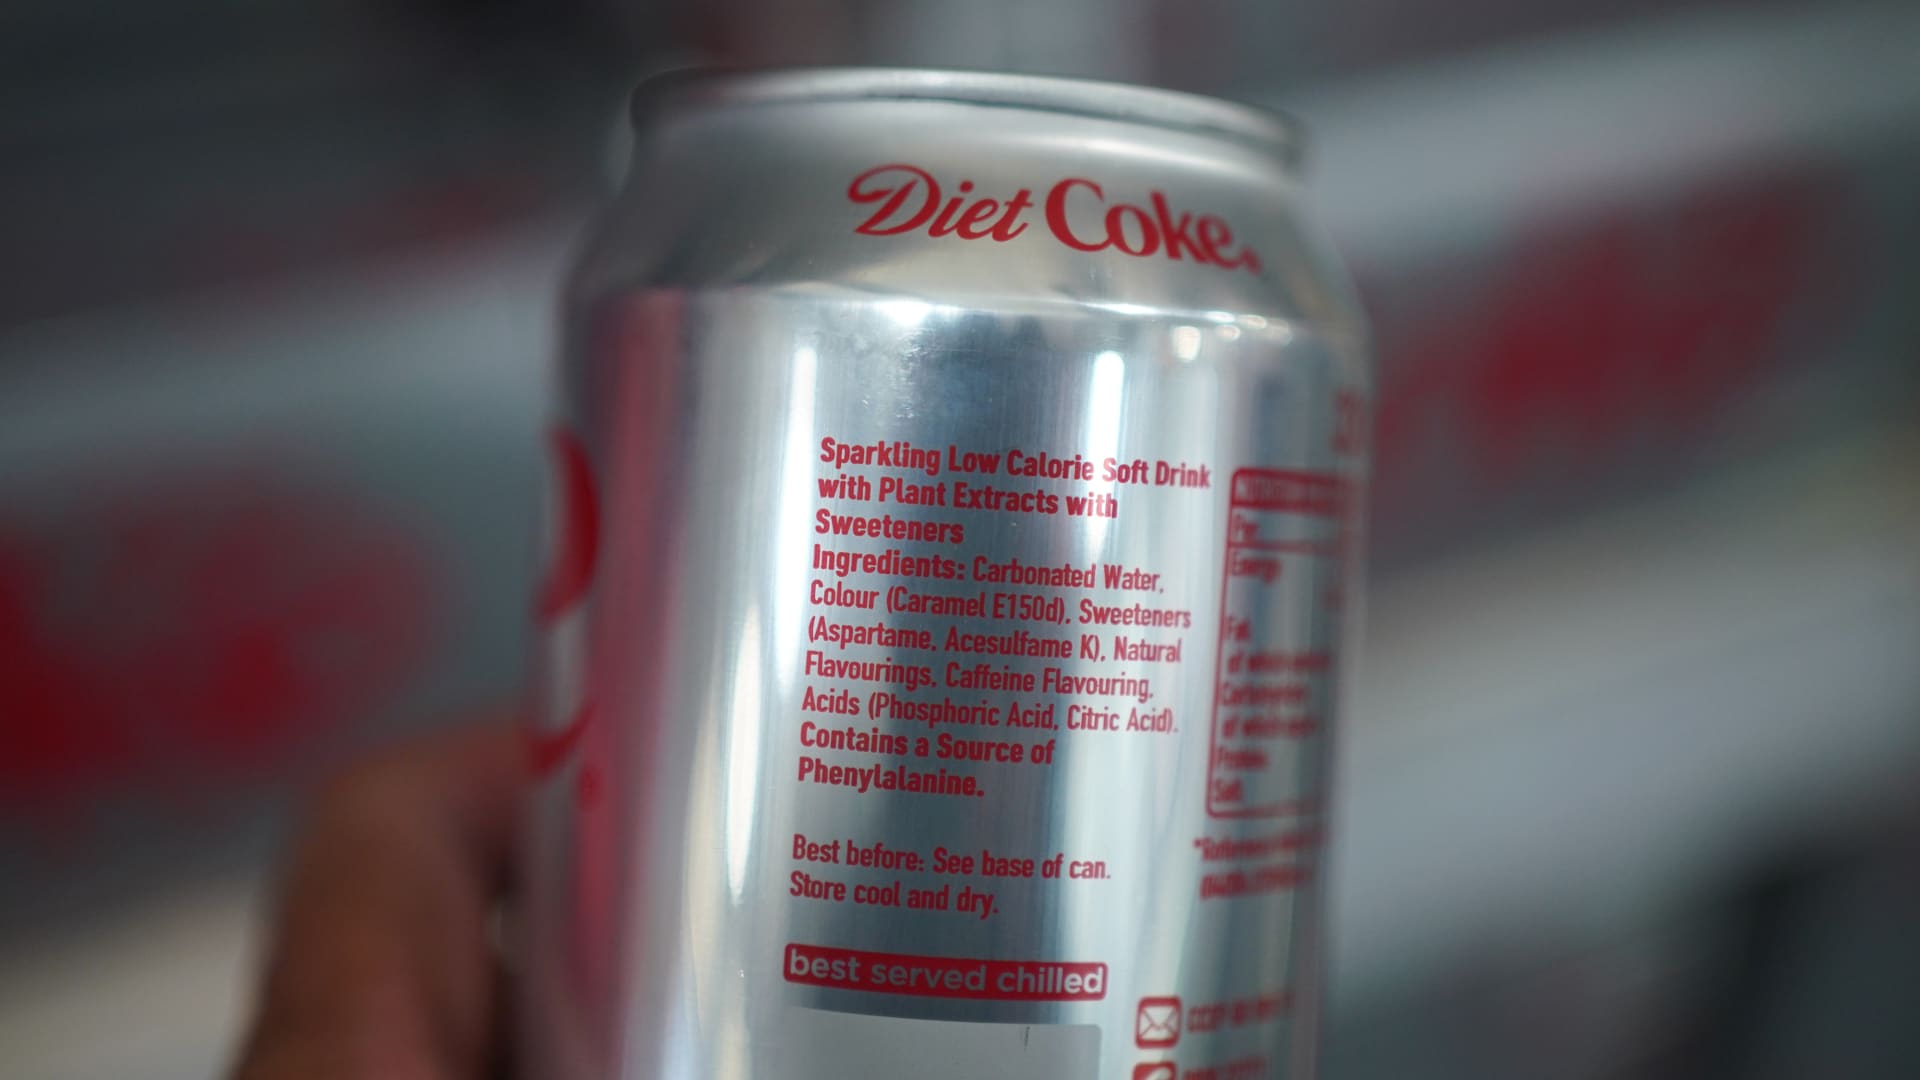 Soda sweetener aspartame may cause cancer but safe within limits